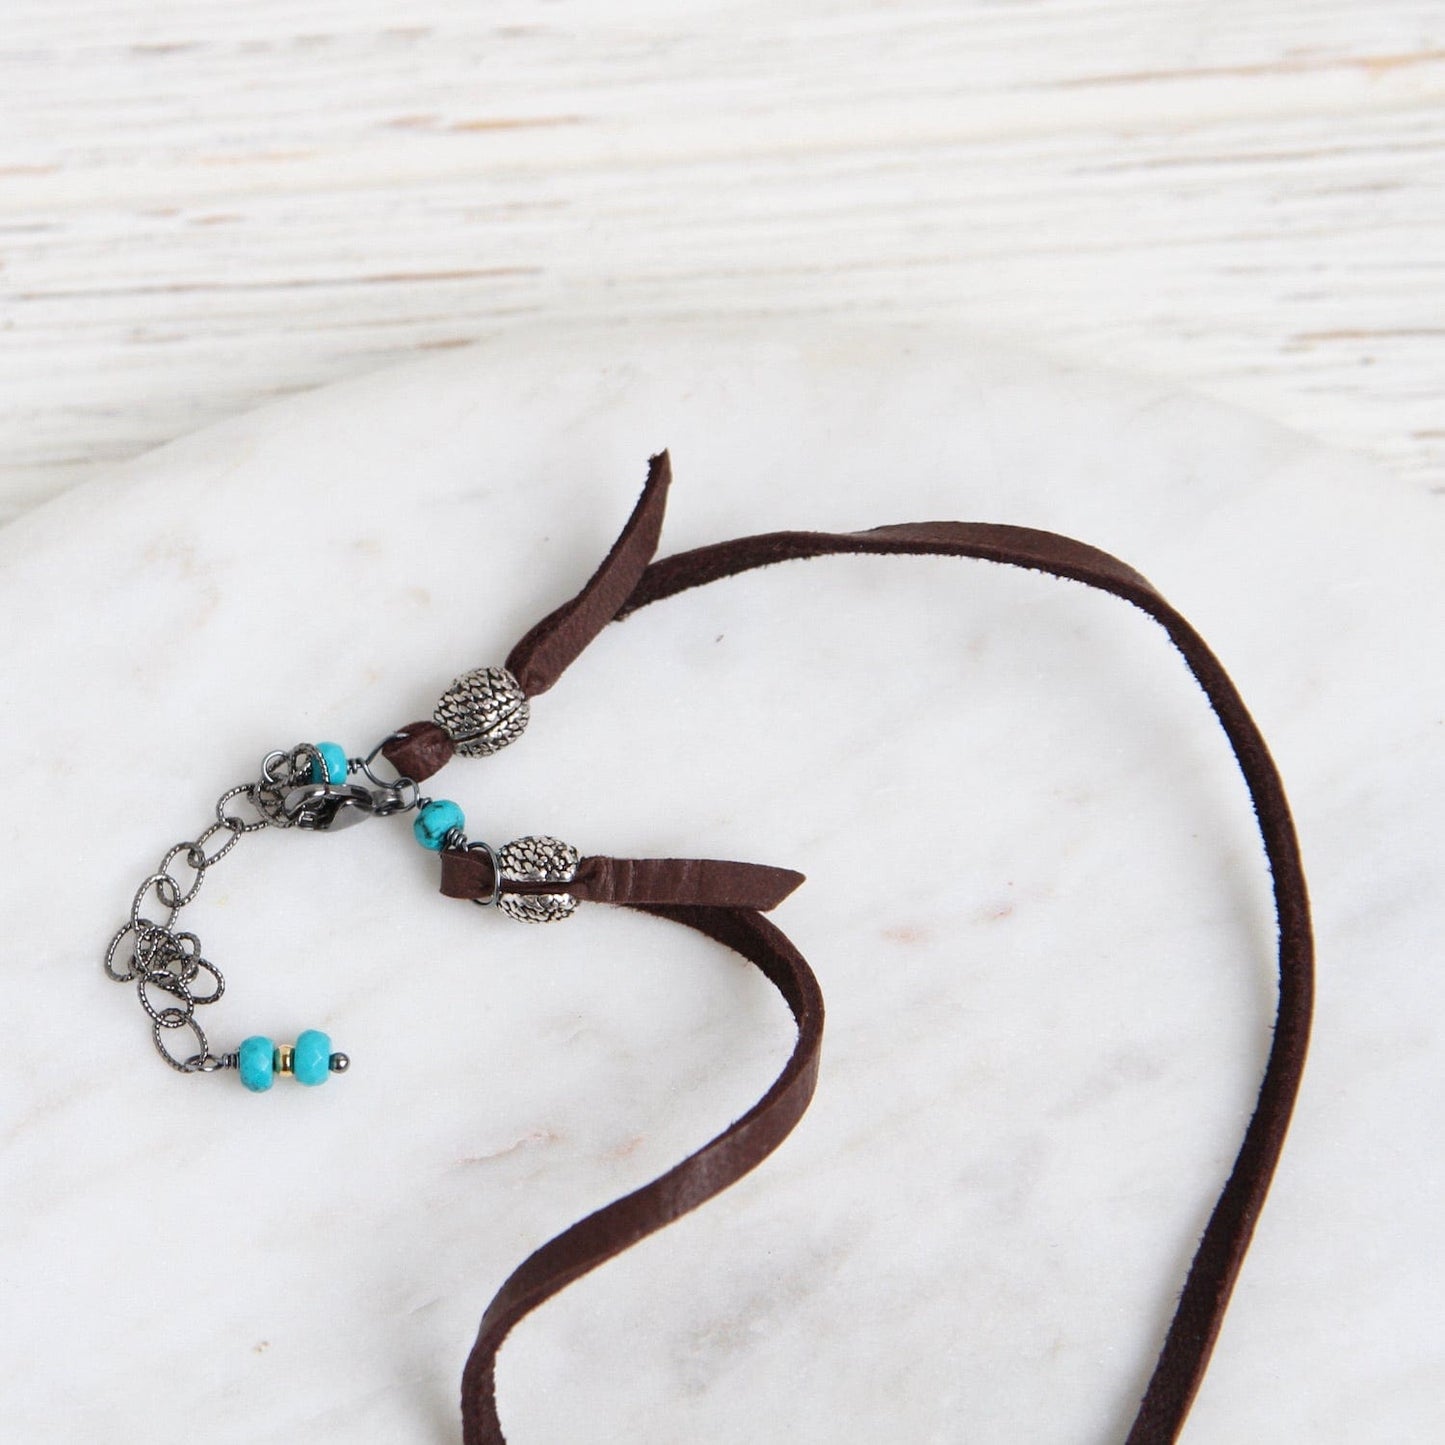 NKL-JM Hand Stitched Large Multi Color Turquoise Suede Necklace